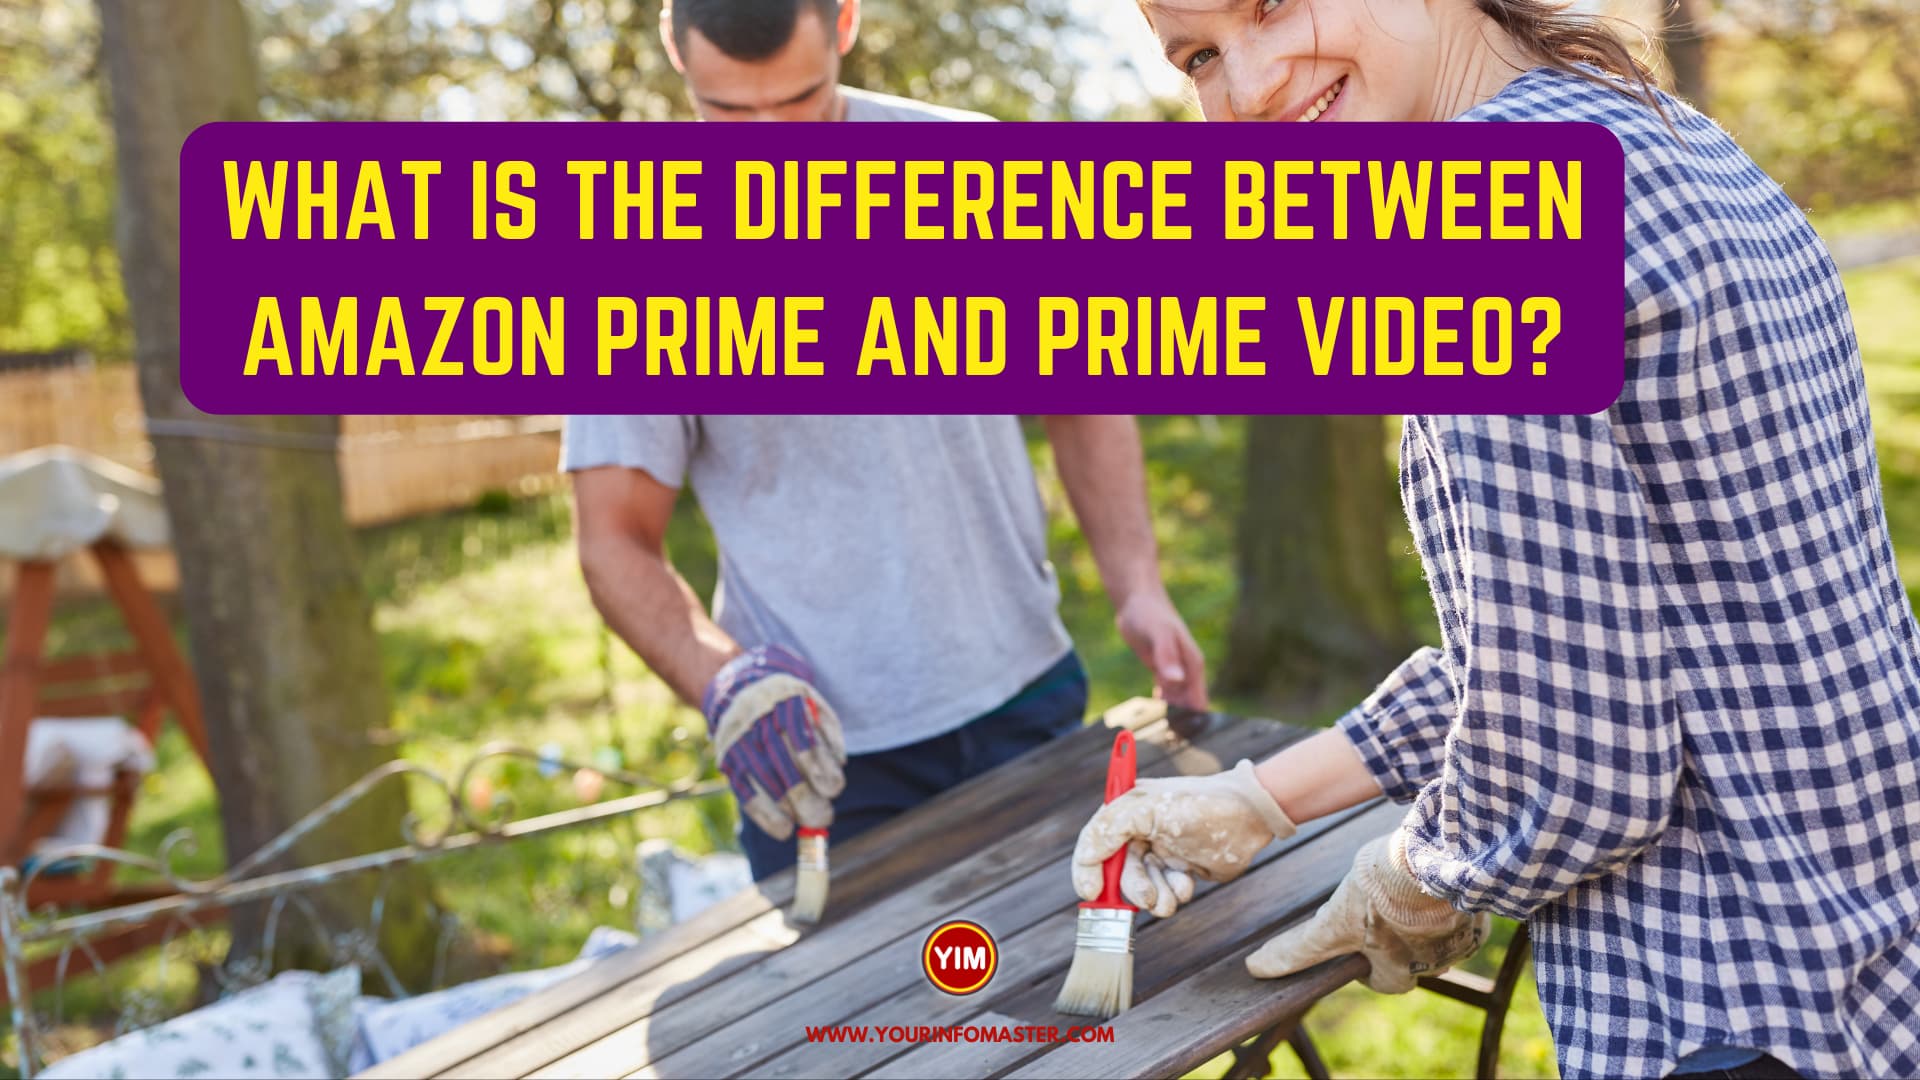 What is the difference between Amazon Prime and Prime Video